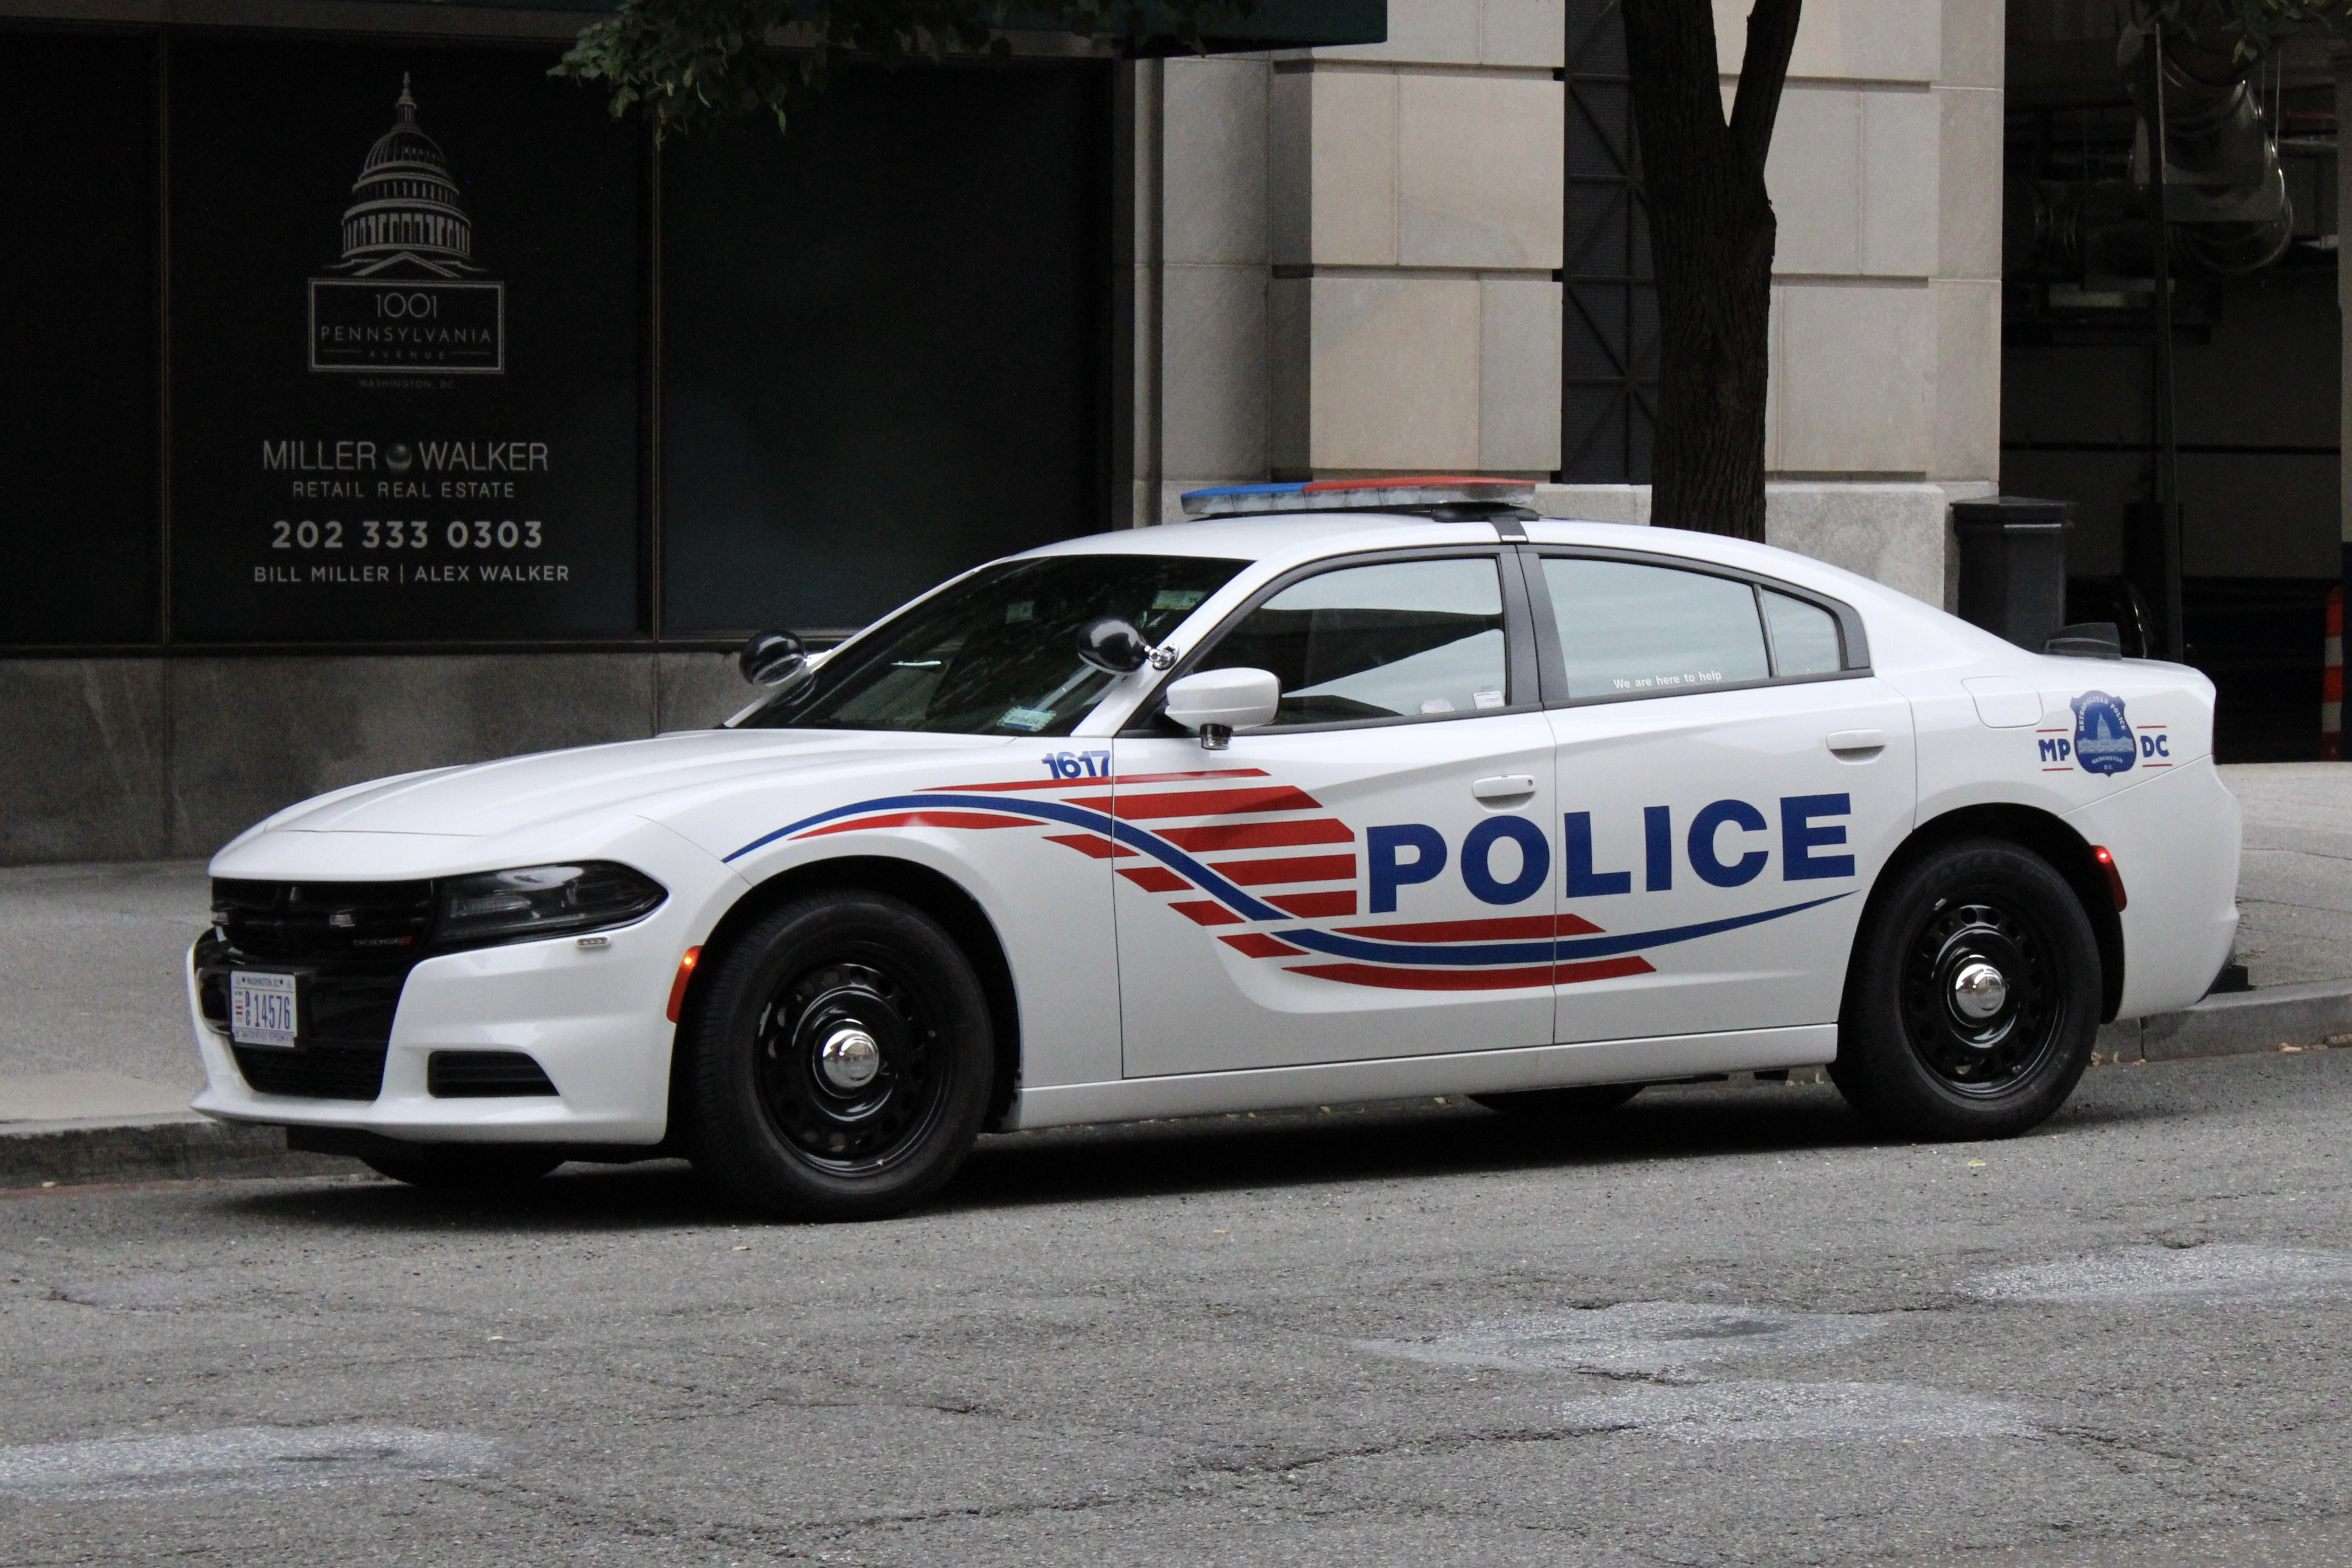 A photo  of Metropolitan Police Department of the District of Columbia
            Cruiser 1617, a 2021 Dodge Charger             taken by @riemergencyvehicles